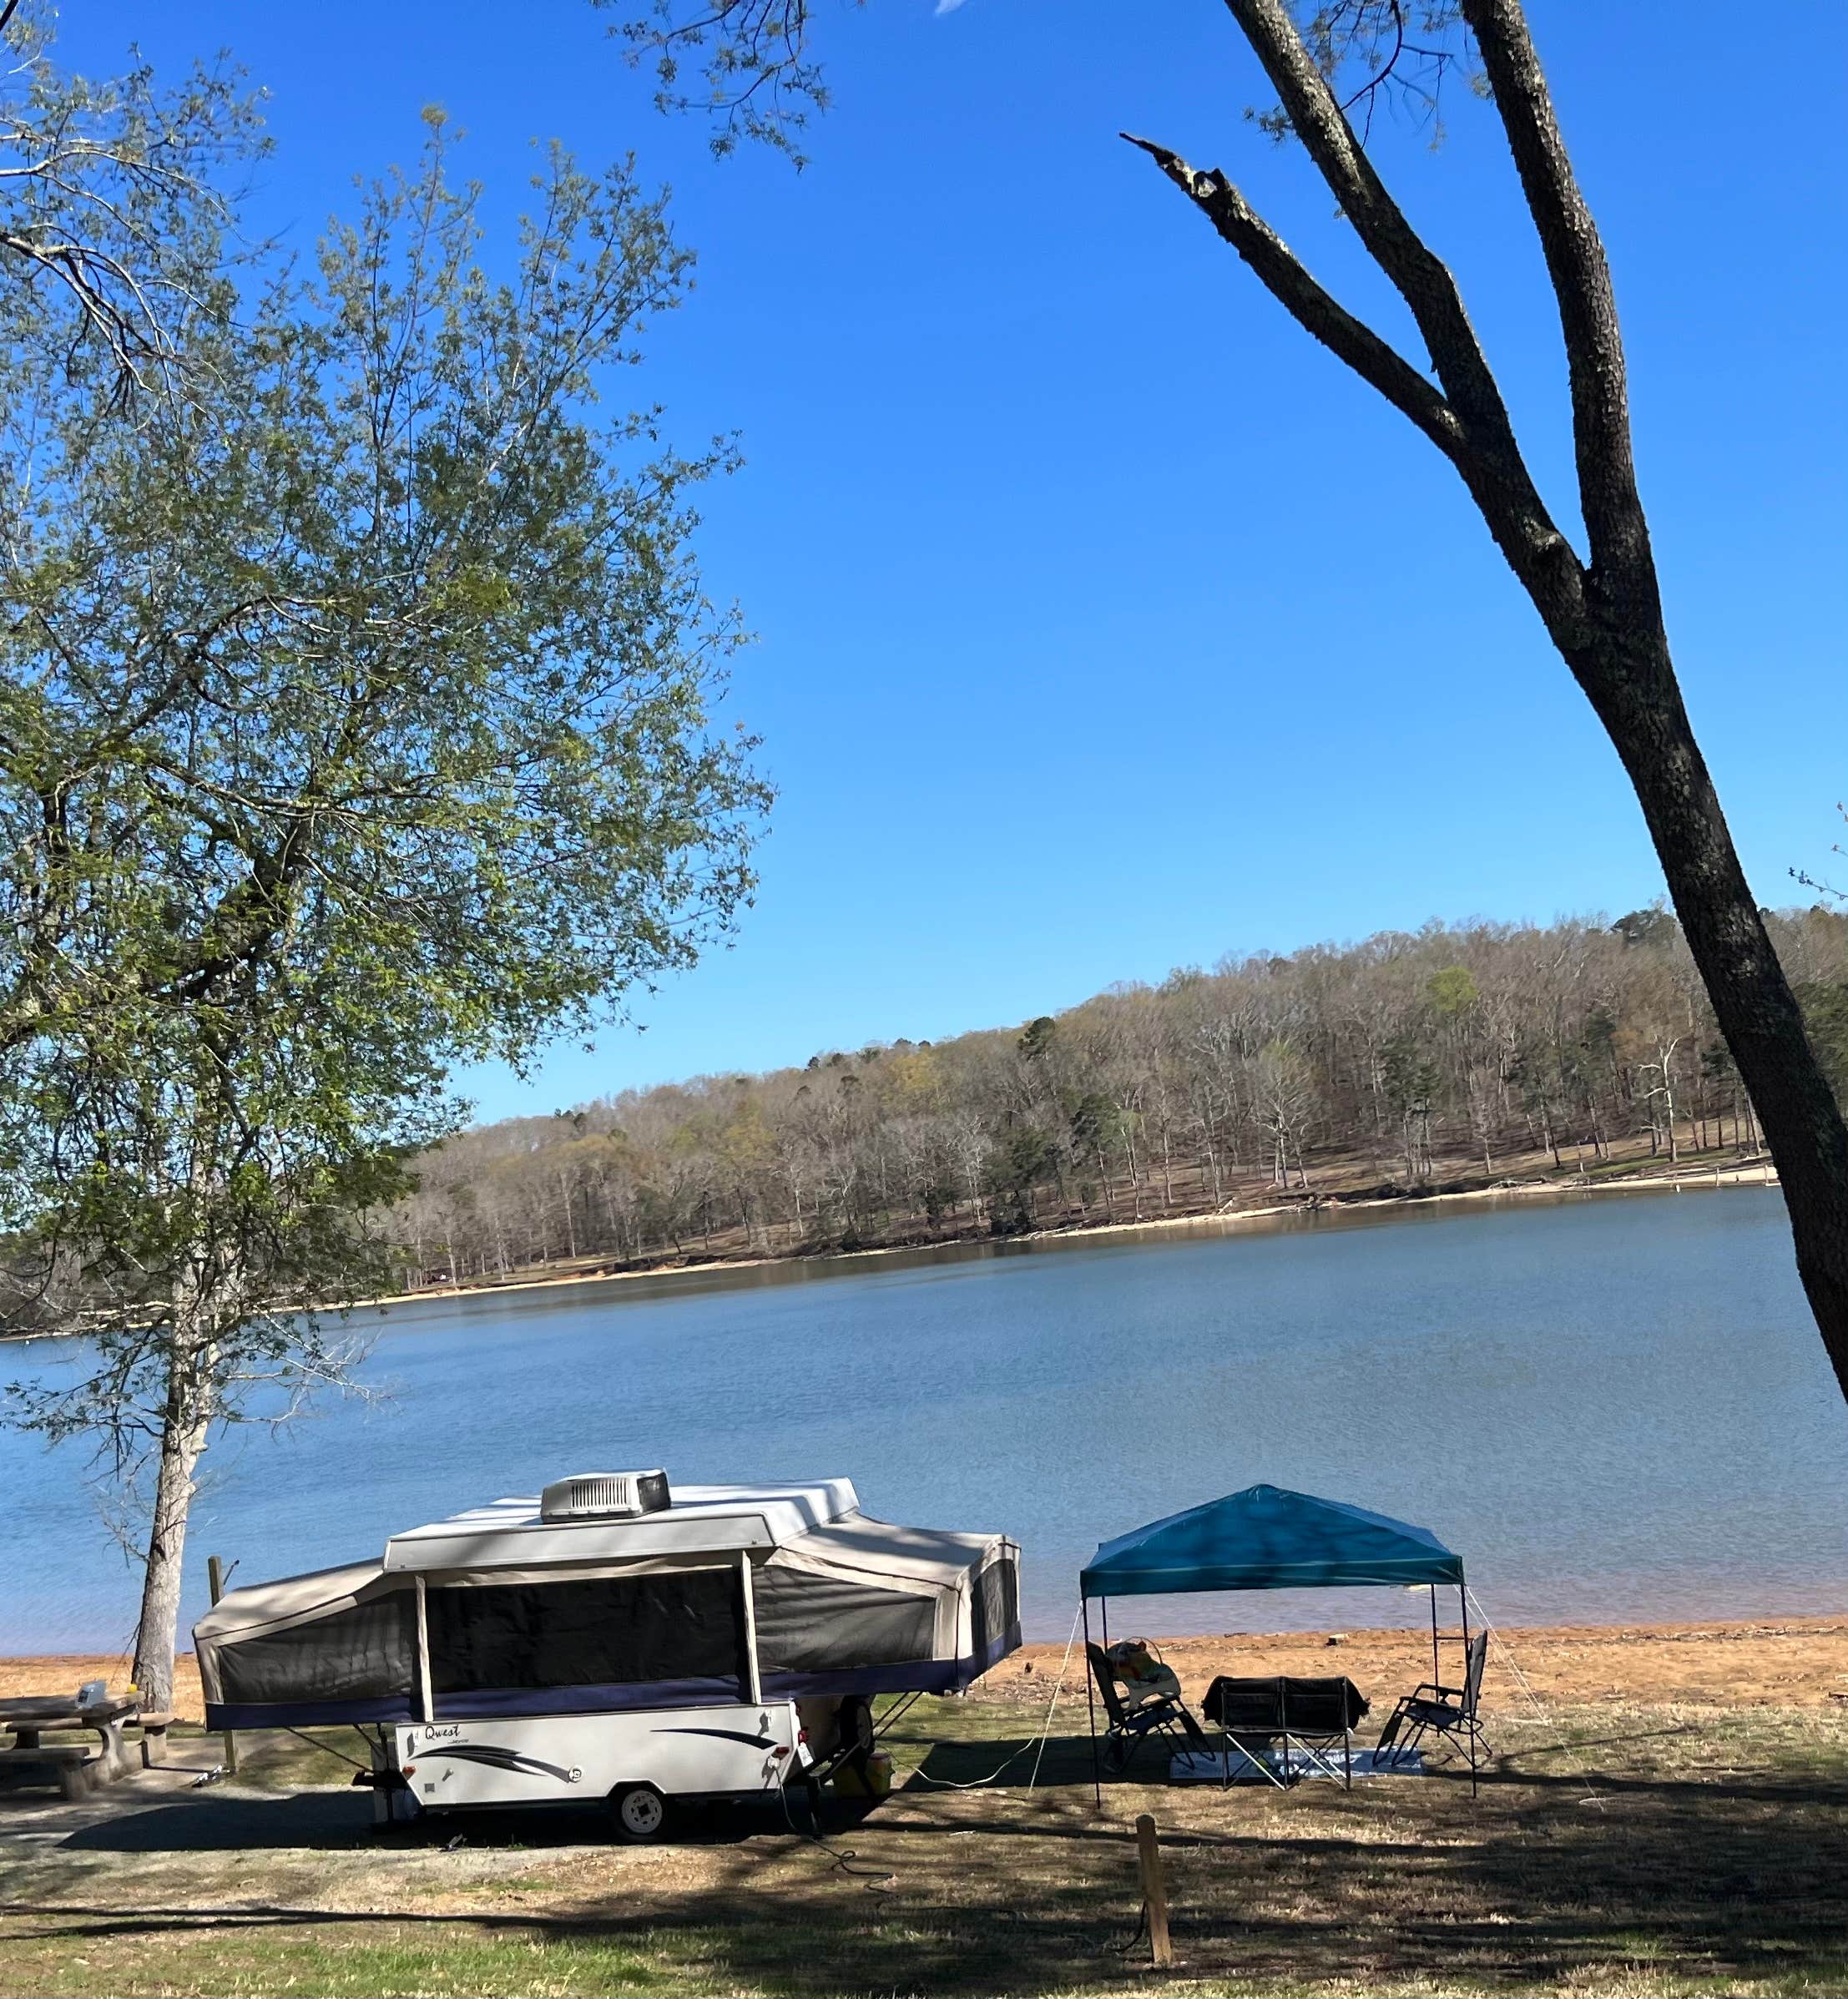 Fooshee Pass Campground - Fish here at Watts Bar Lake in Ten Mile, Tn at  Fooshee Pass campground are biting! Even with a Ronco pocket fisherman!